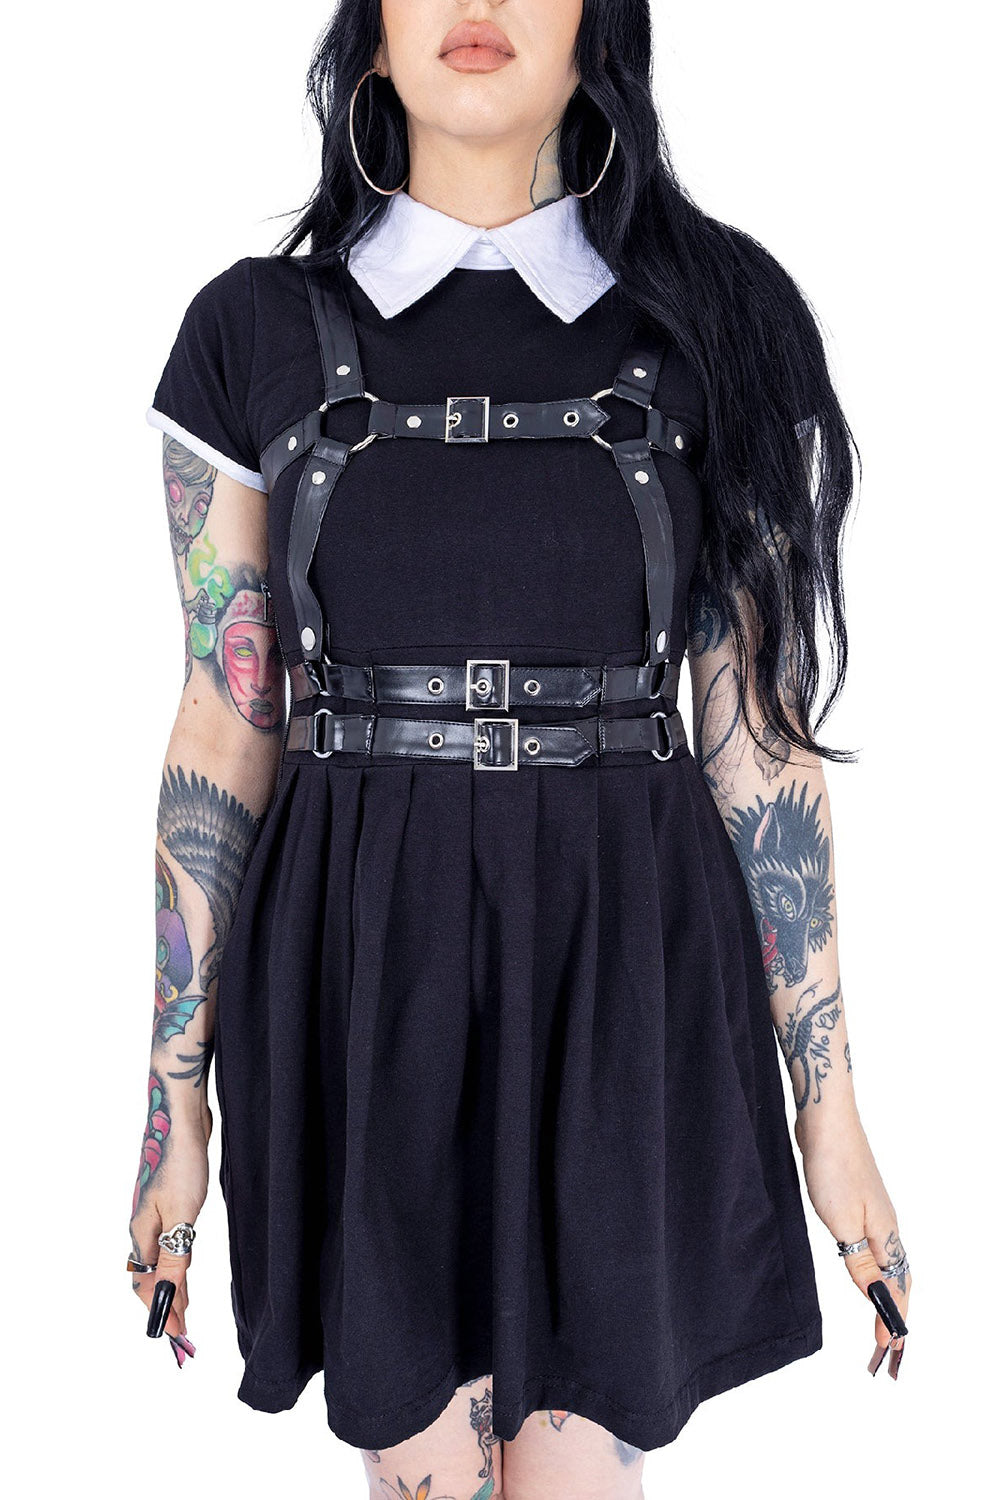 gothic wednesday addams inspired dress for women